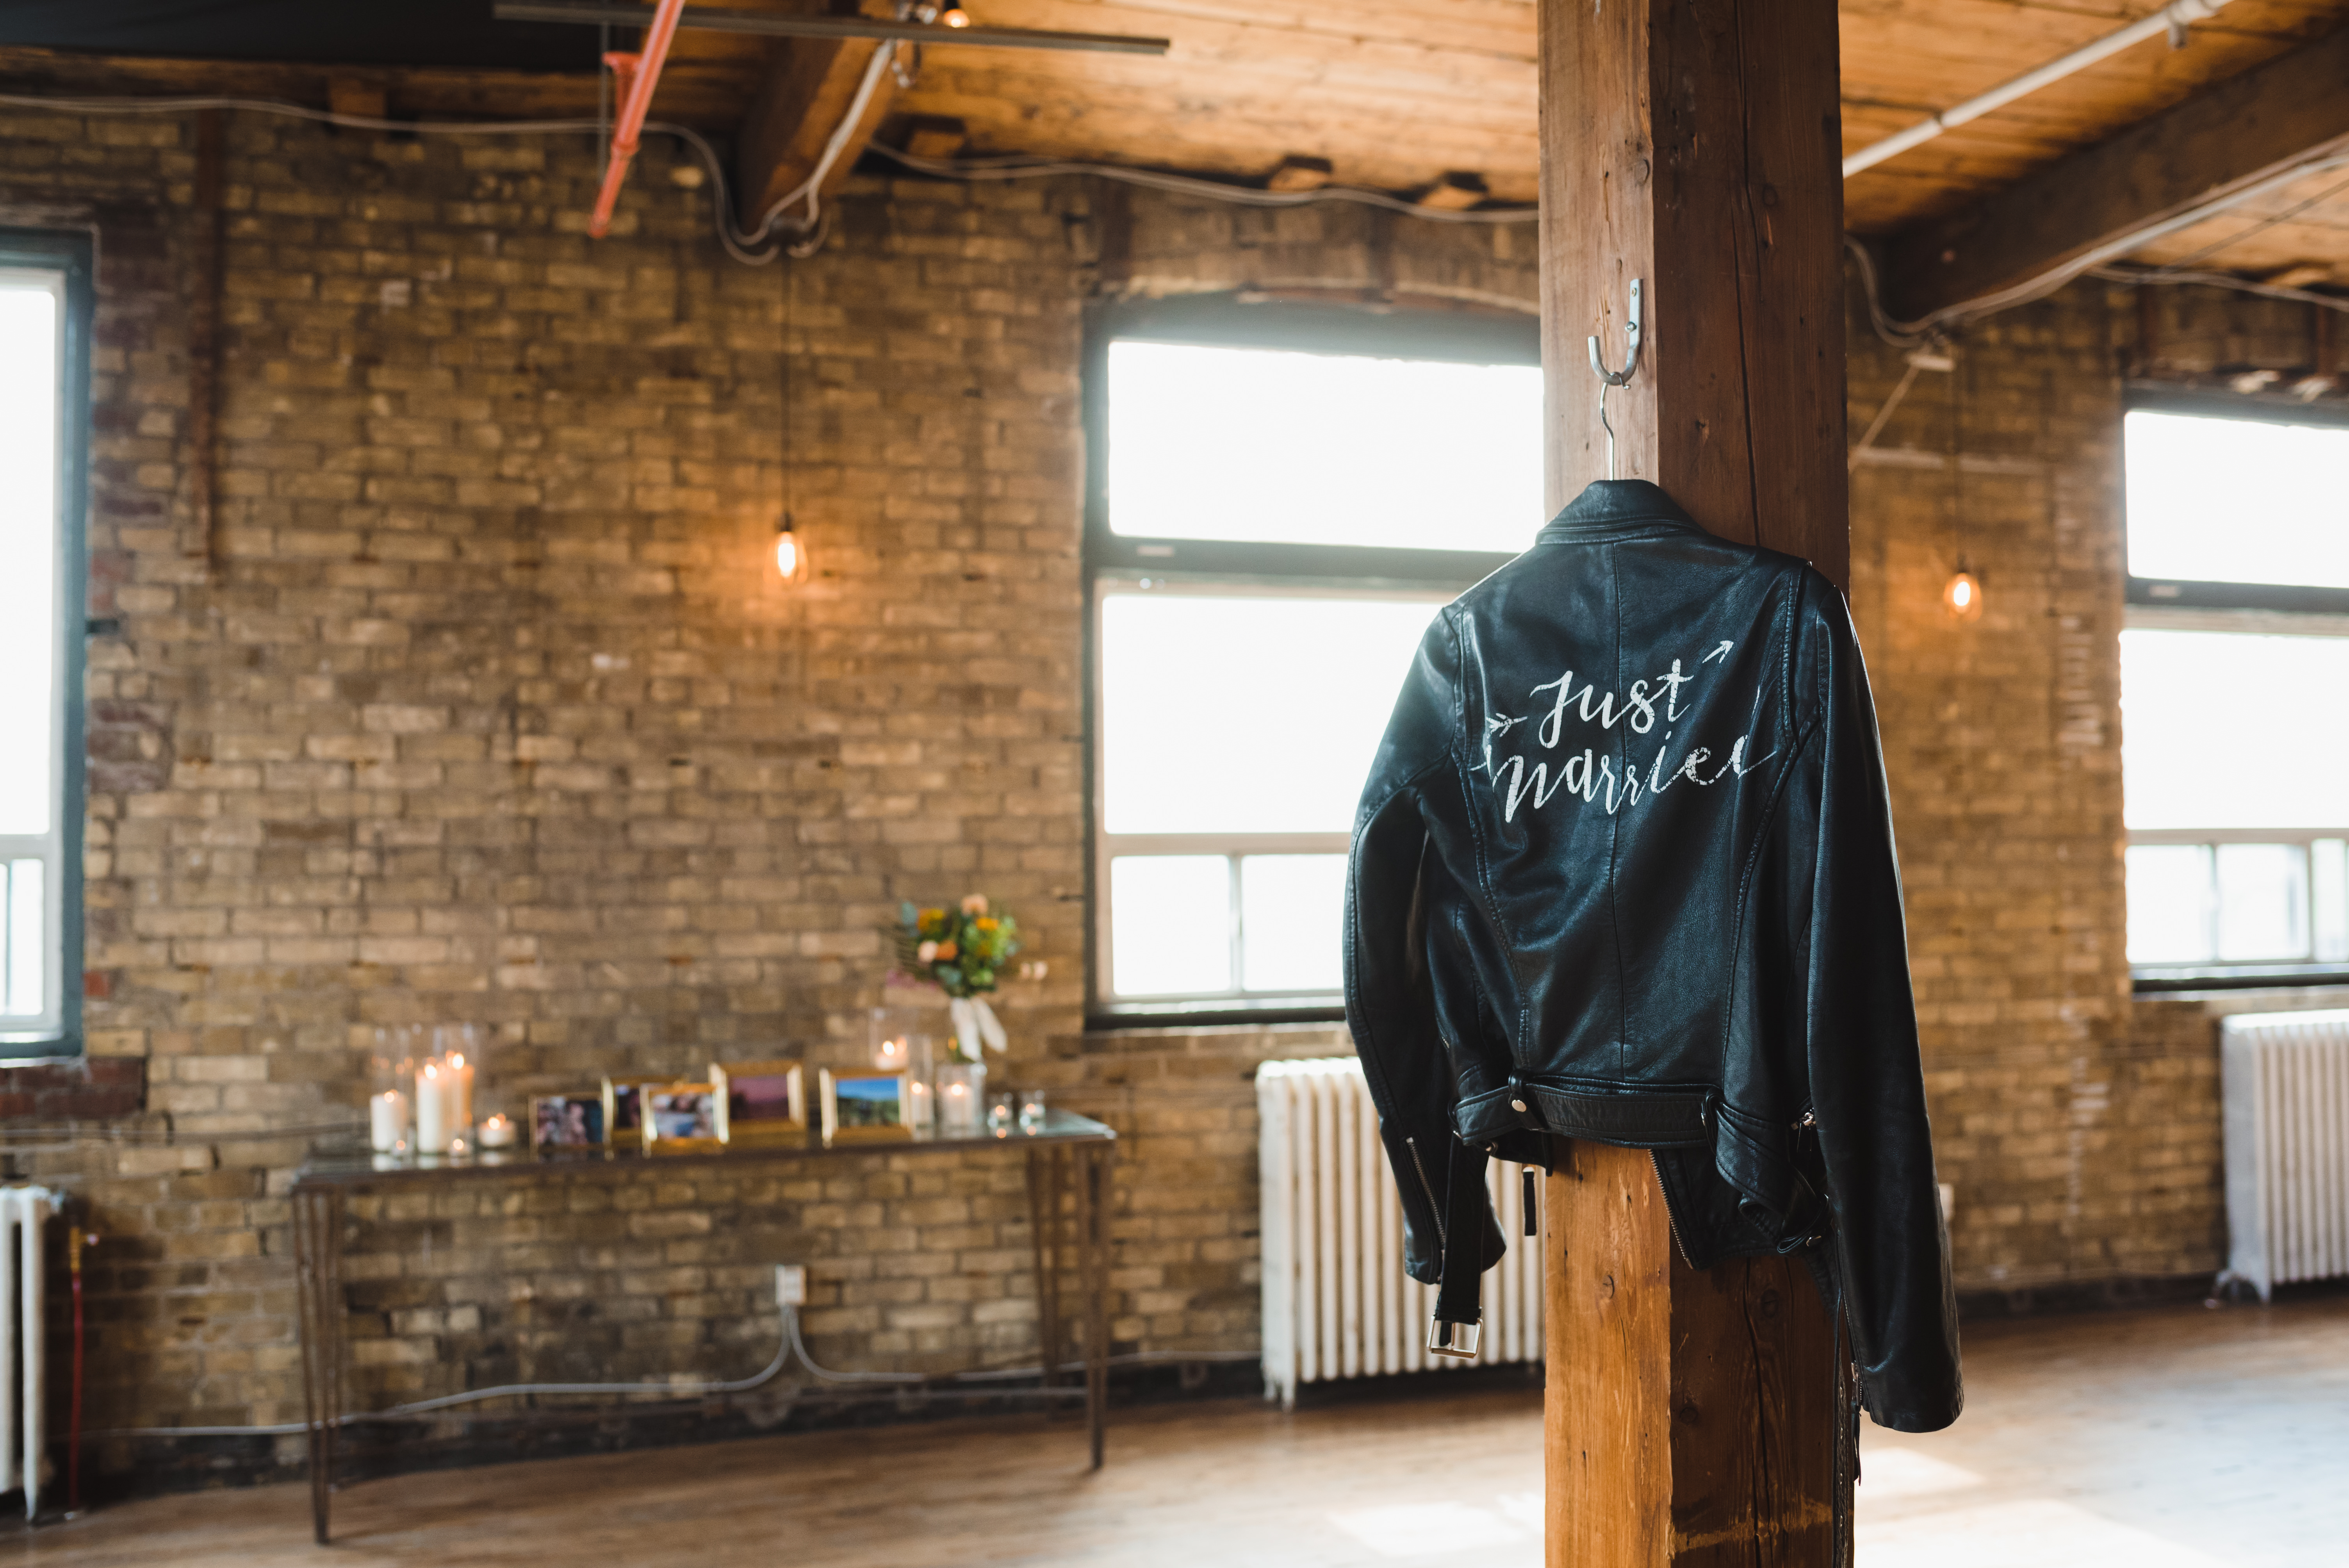 what is the just married leather jacket?